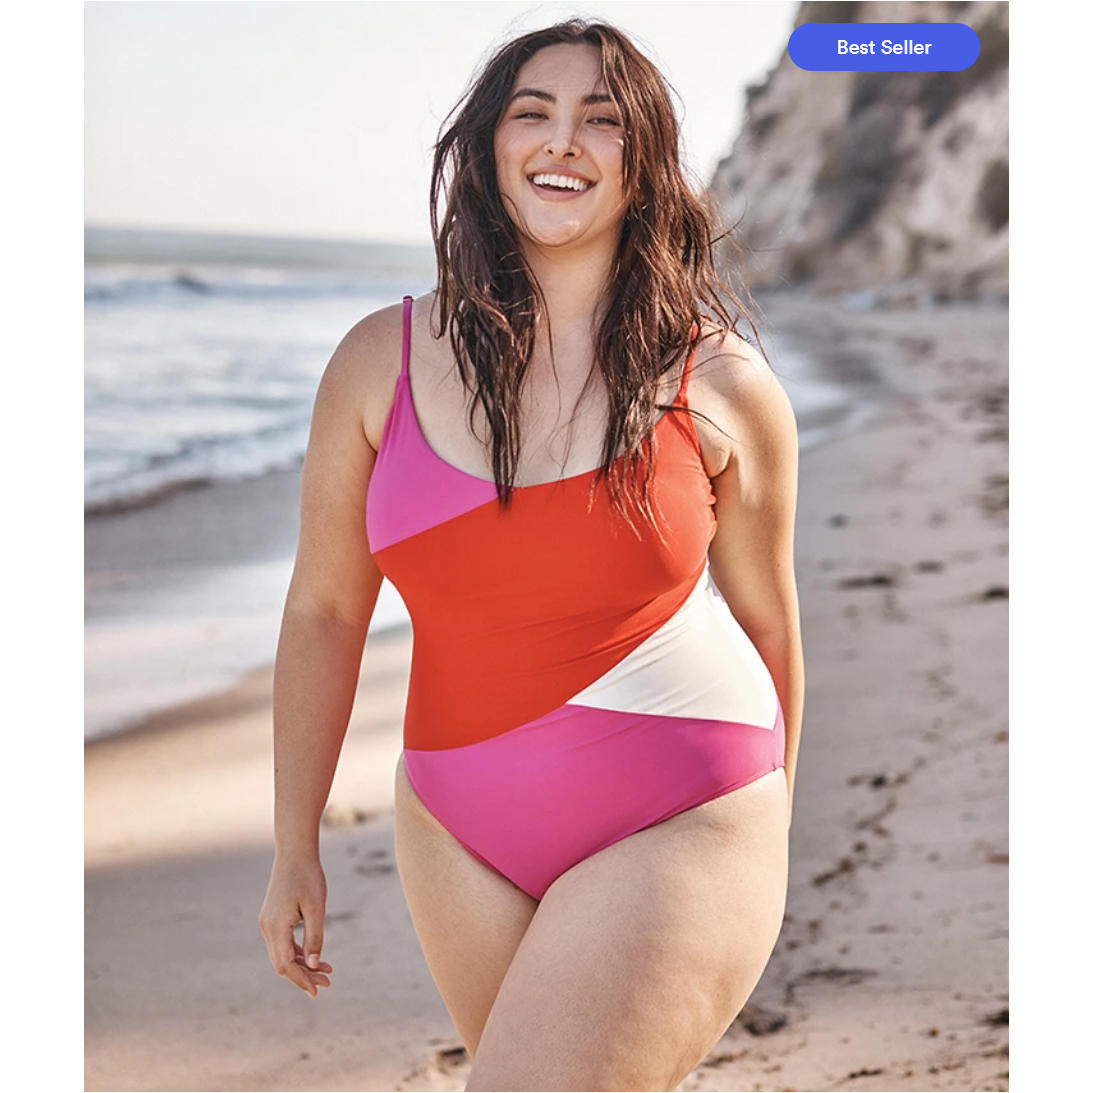 Summersalt swimsuits: Snag affordable, stylish bathing suits to